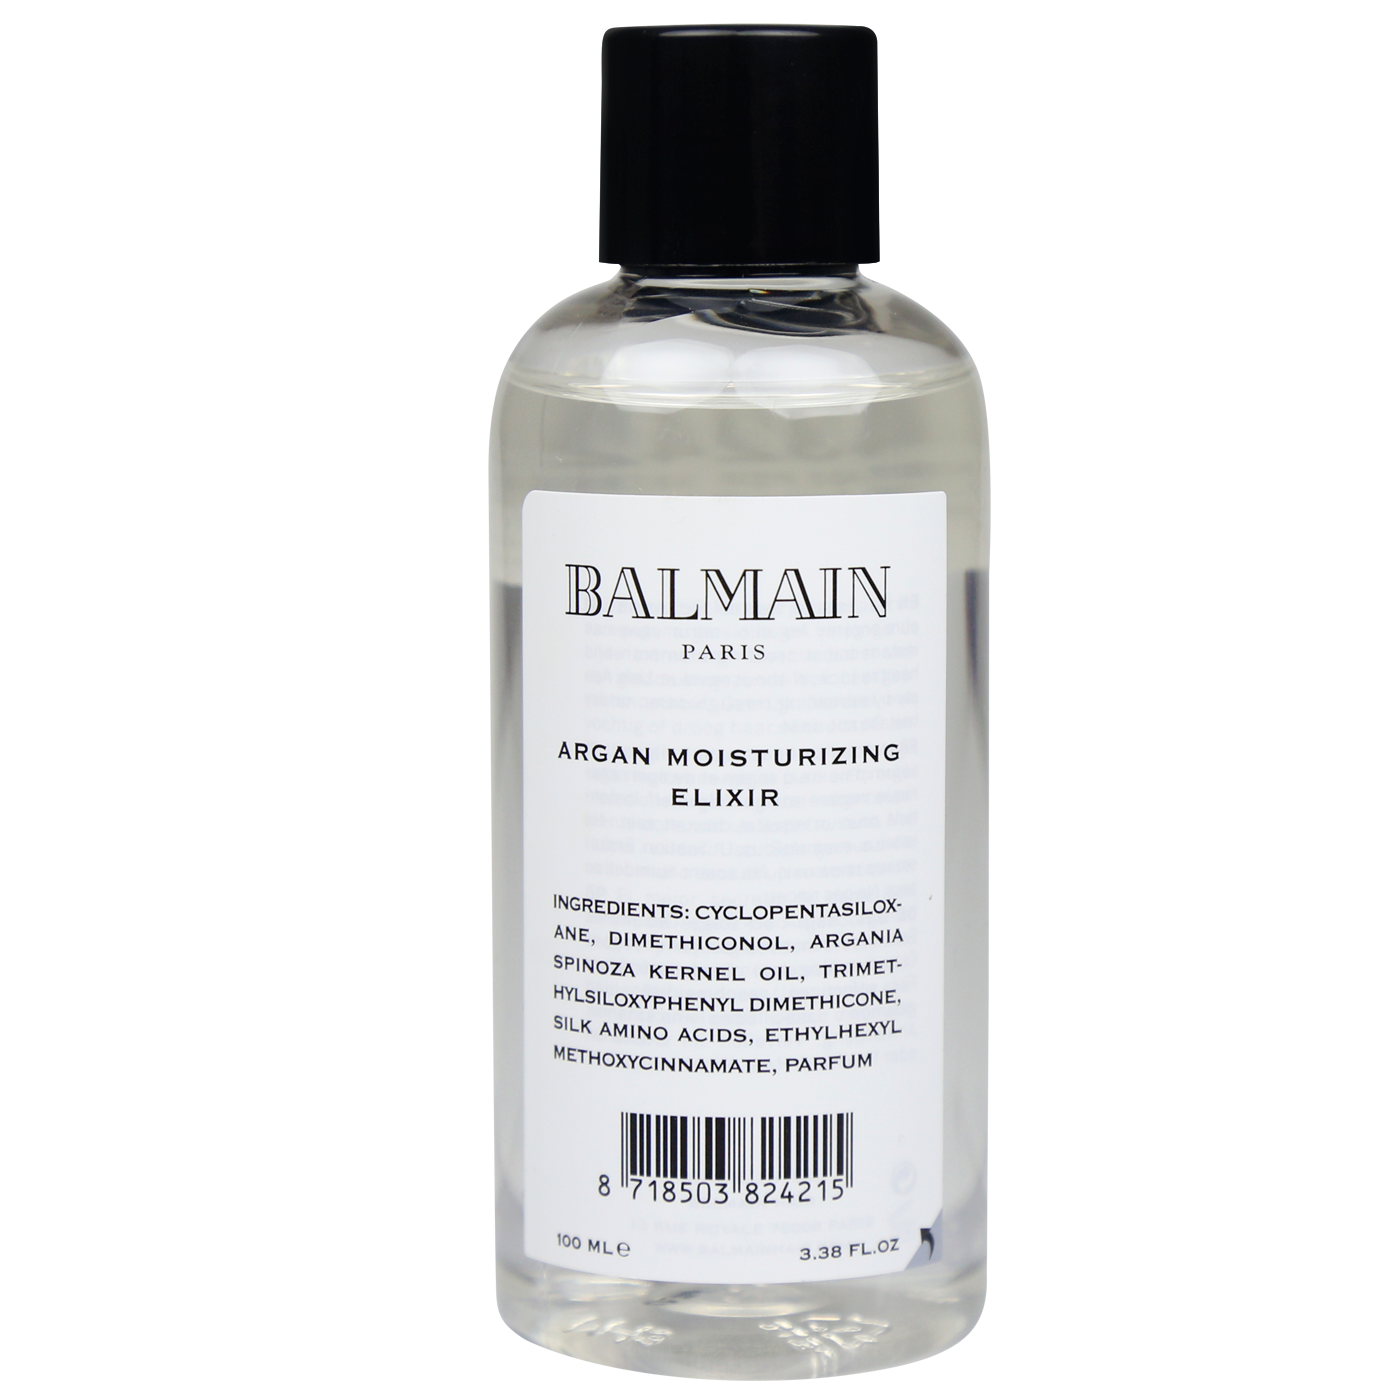 Sprout Jobtilbud Jolly Argan Moisturizing Elixir | Balmain Balmain Paris Argan Moisturizing Elixir  - We Are Eves: honest cosmetic reviews.